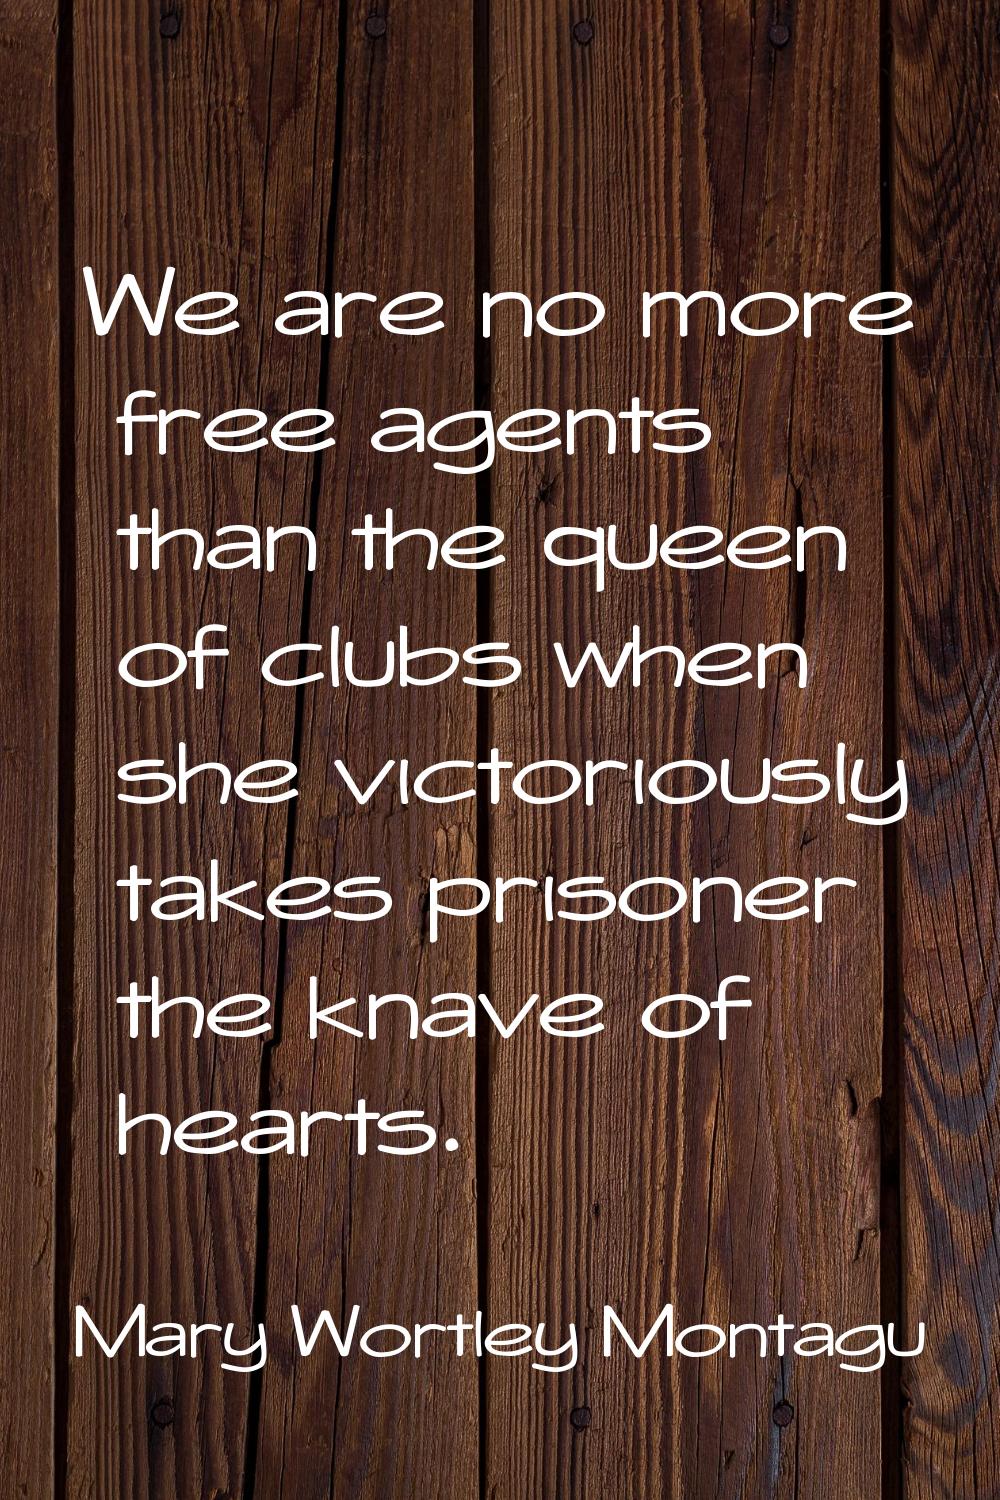 We are no more free agents than the queen of clubs when she victoriously takes prisoner the knave o